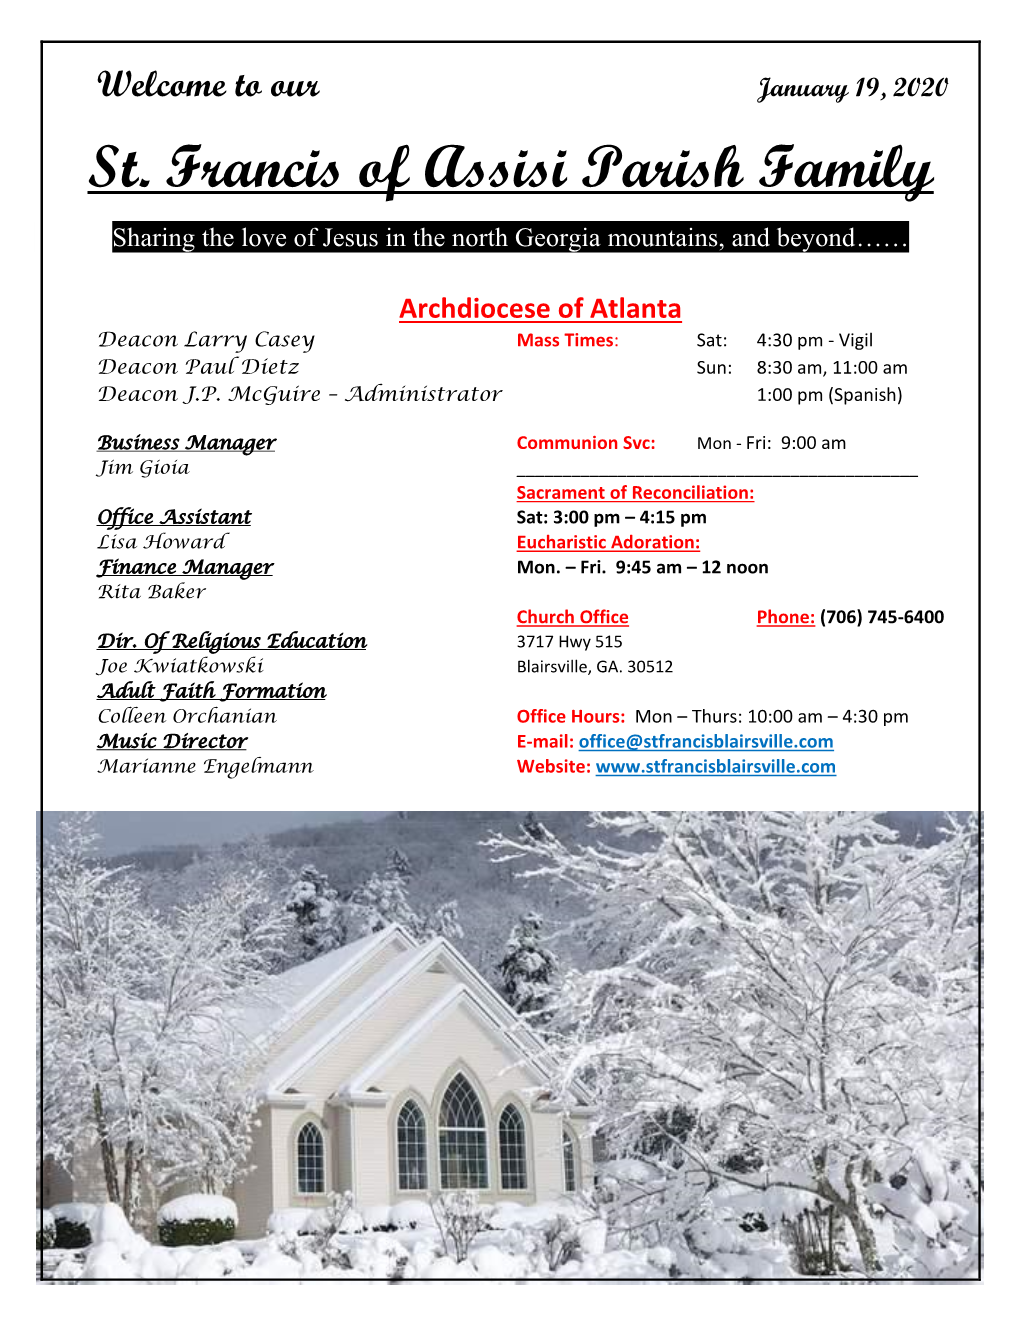 Our January 19, 2020 St. Francis of Assisi Parish Family